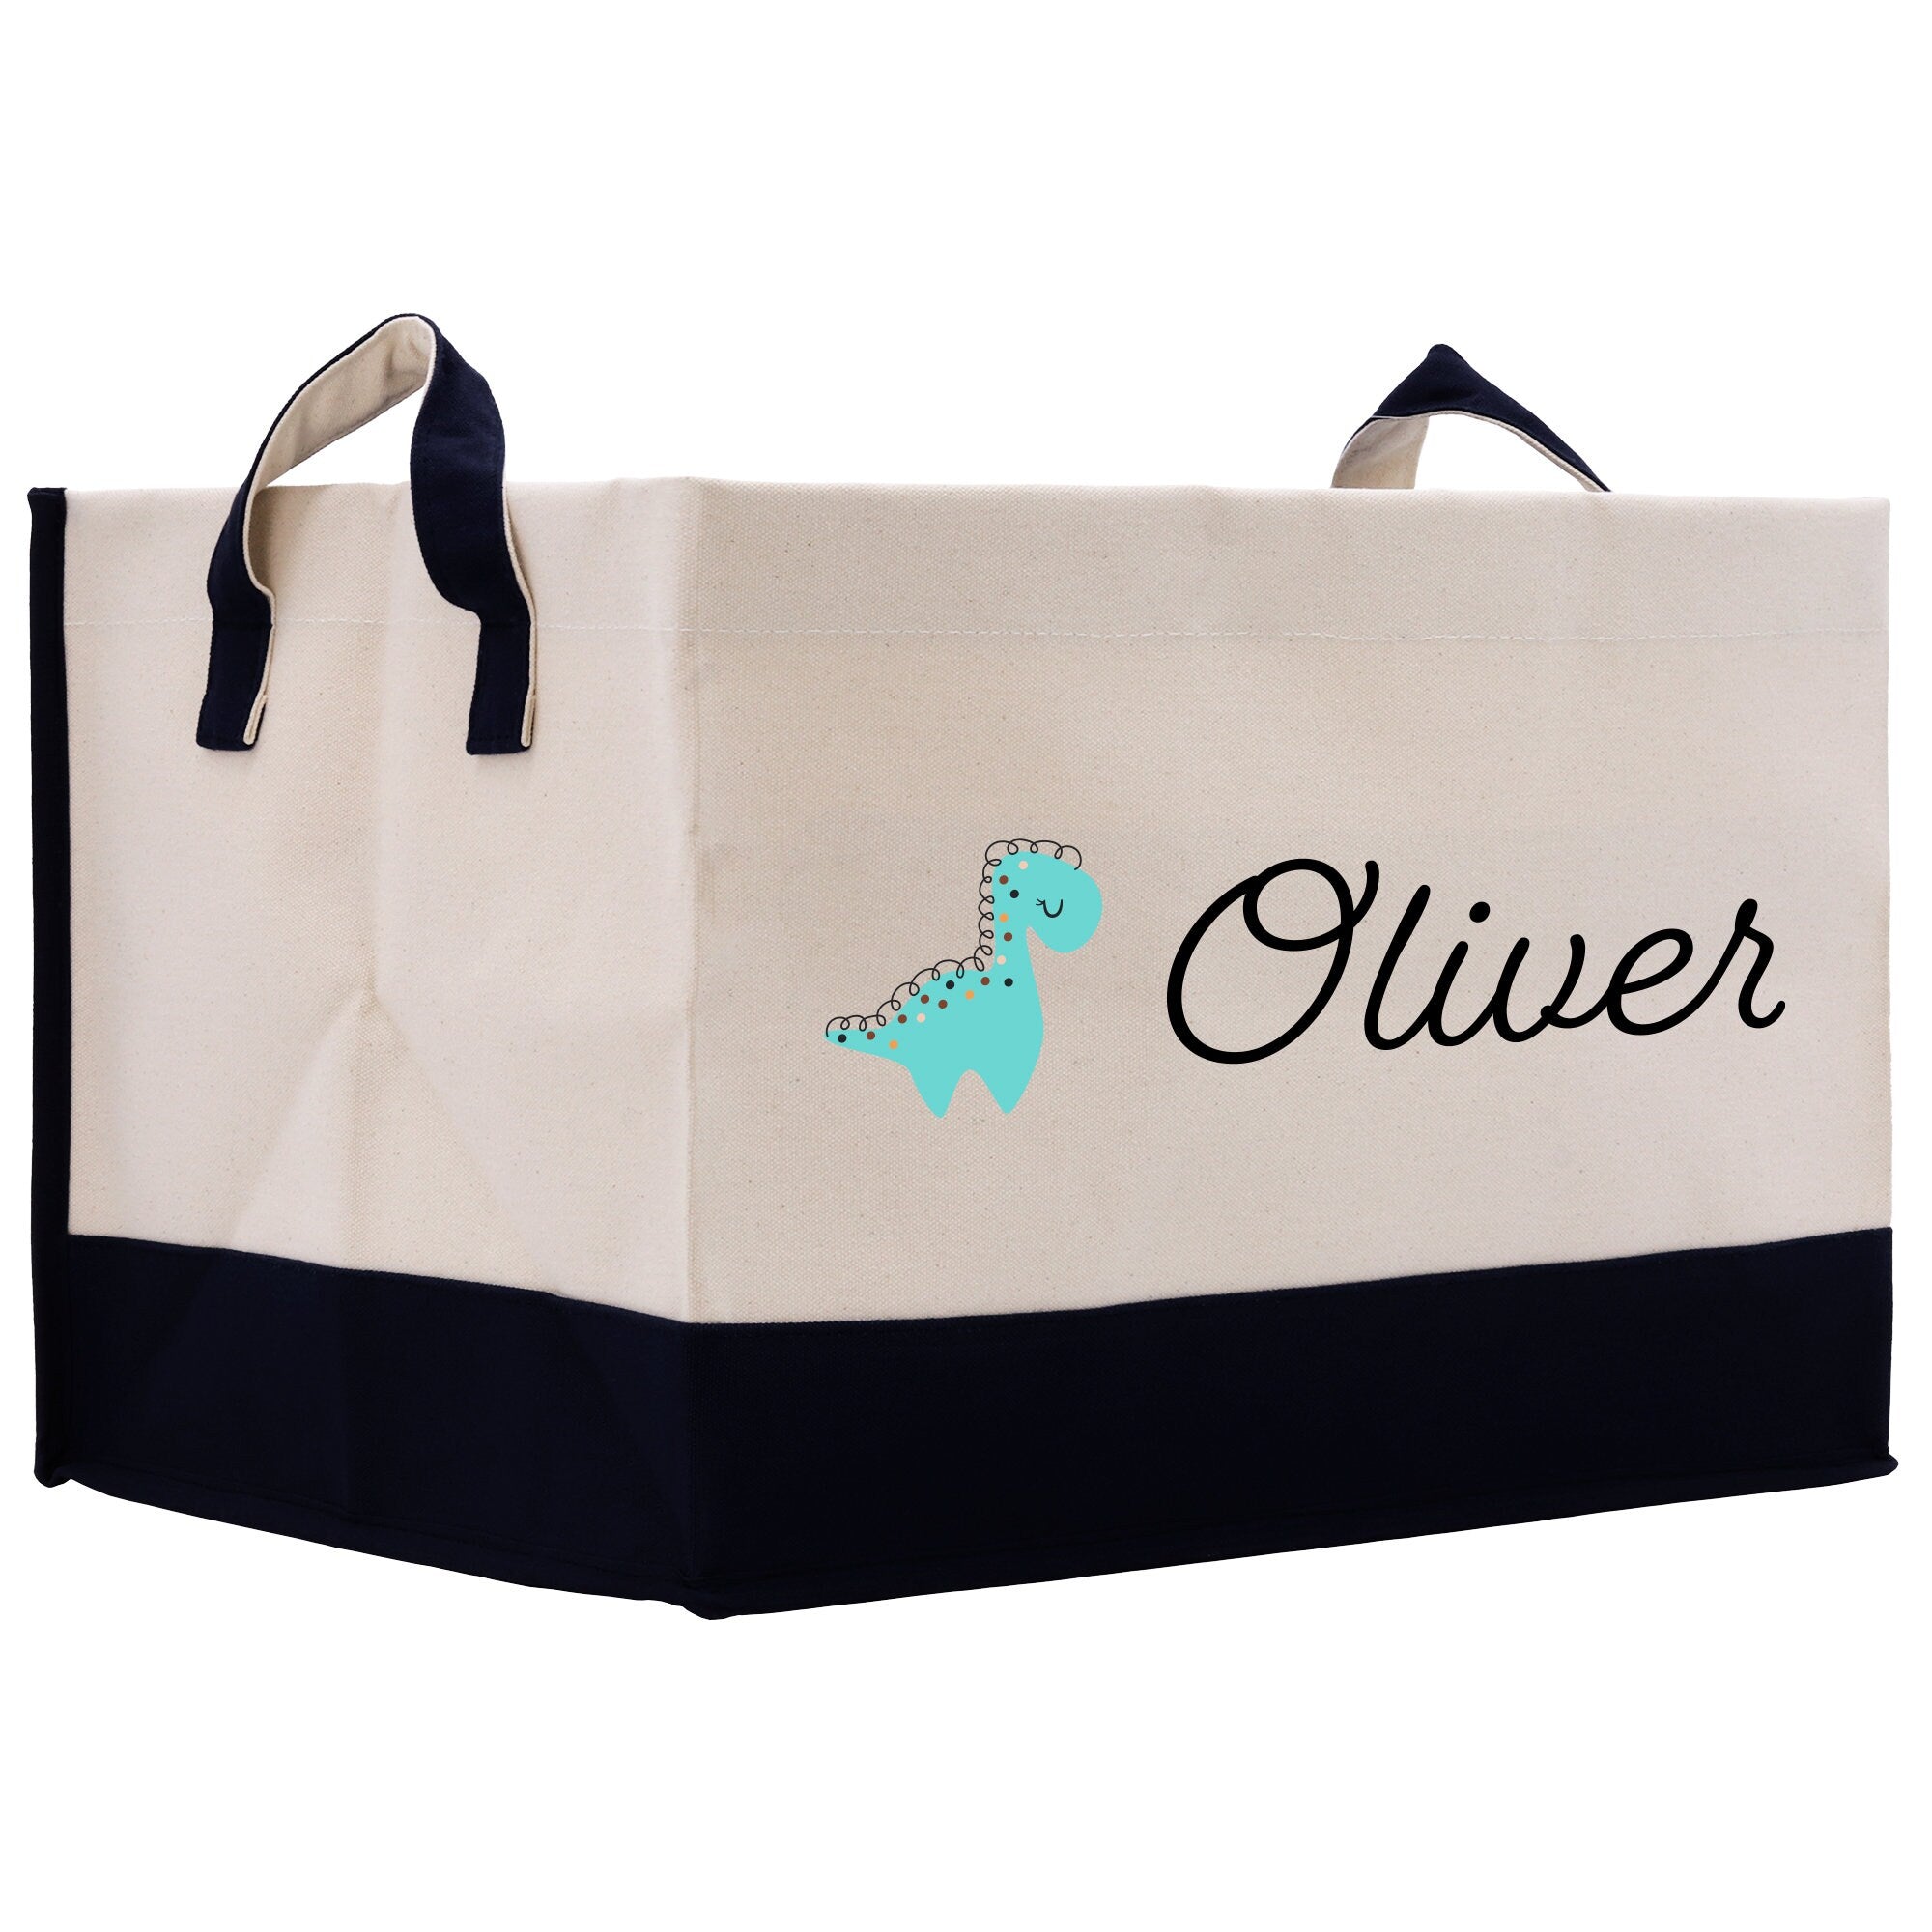 a white and black shopping bag with a dinosaur on it